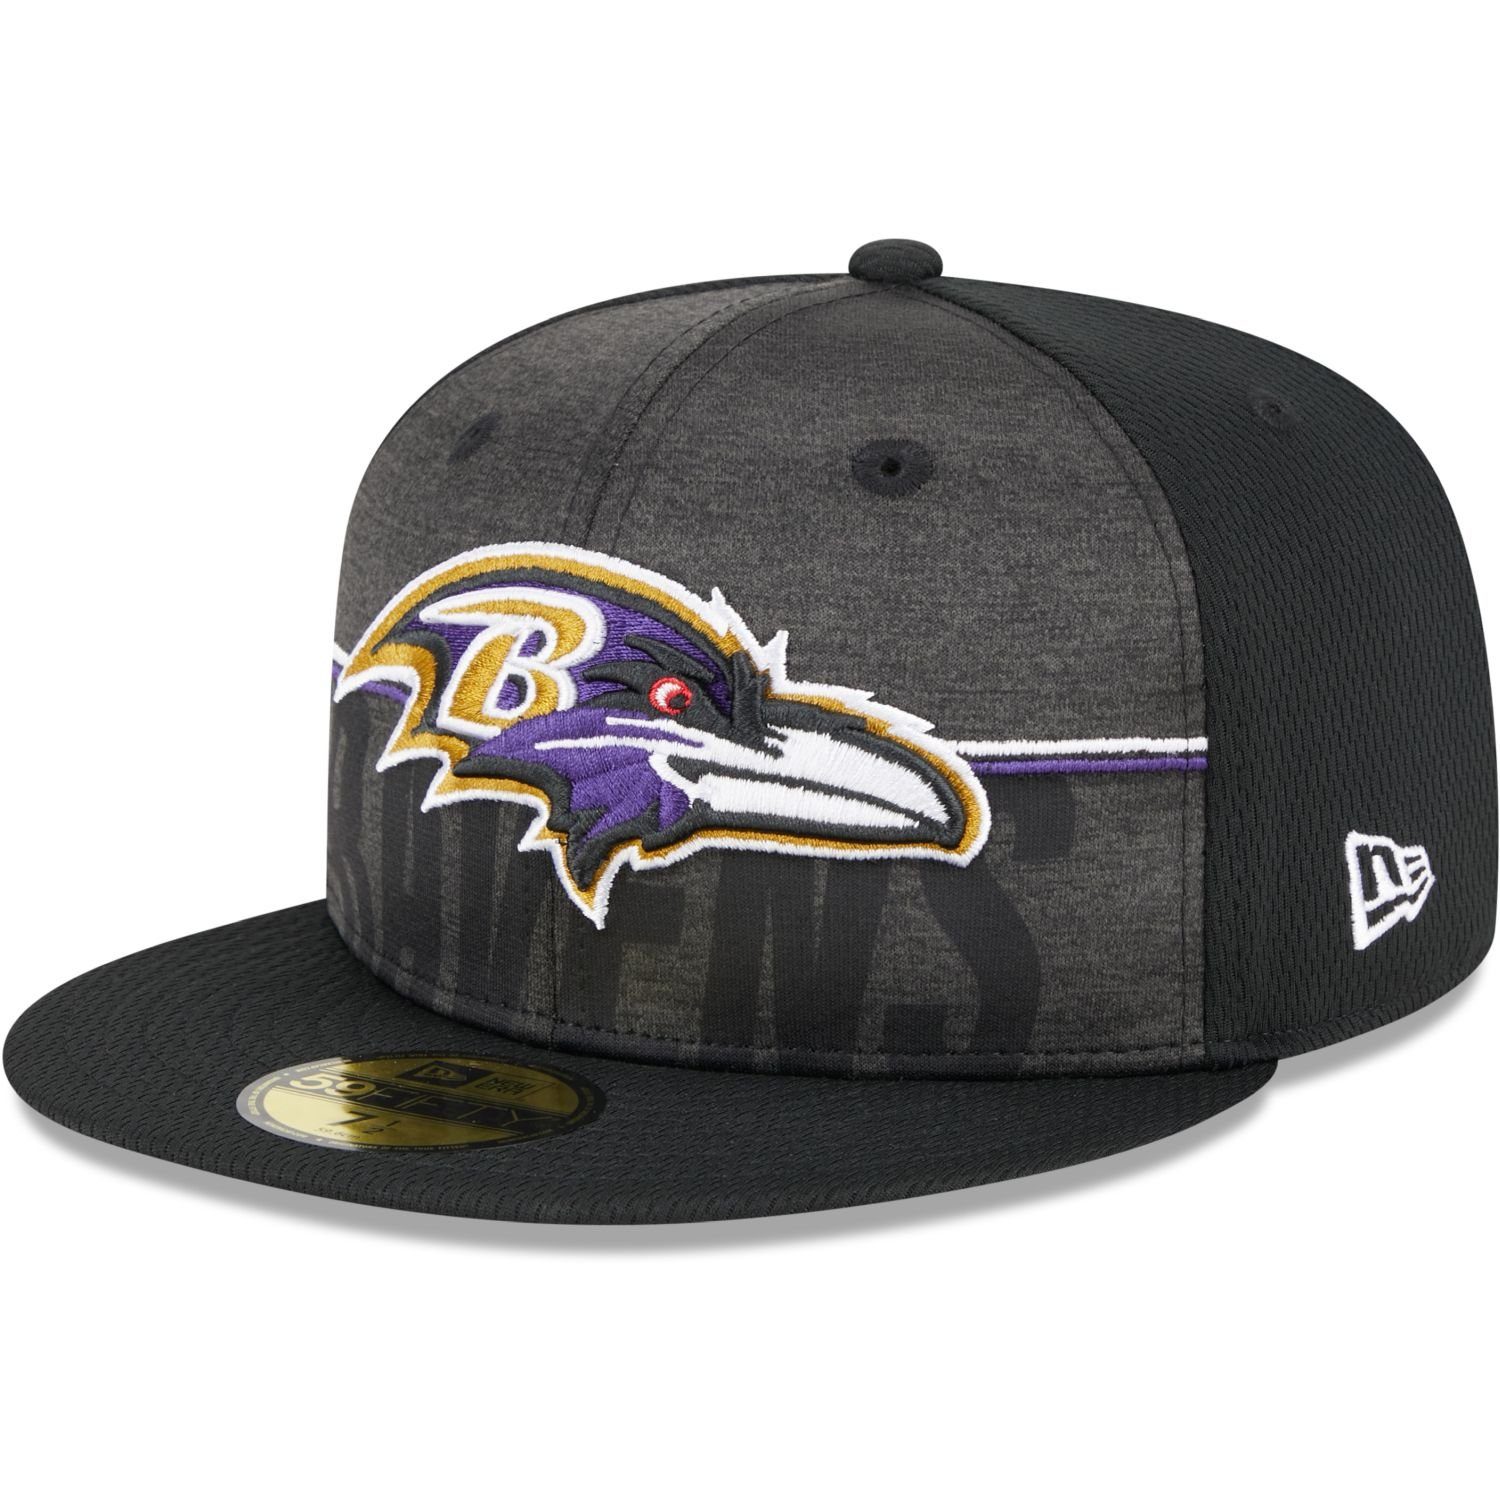 New Era Fitted Cap 59Fifty NFL TRAINING Baltimore Ravens